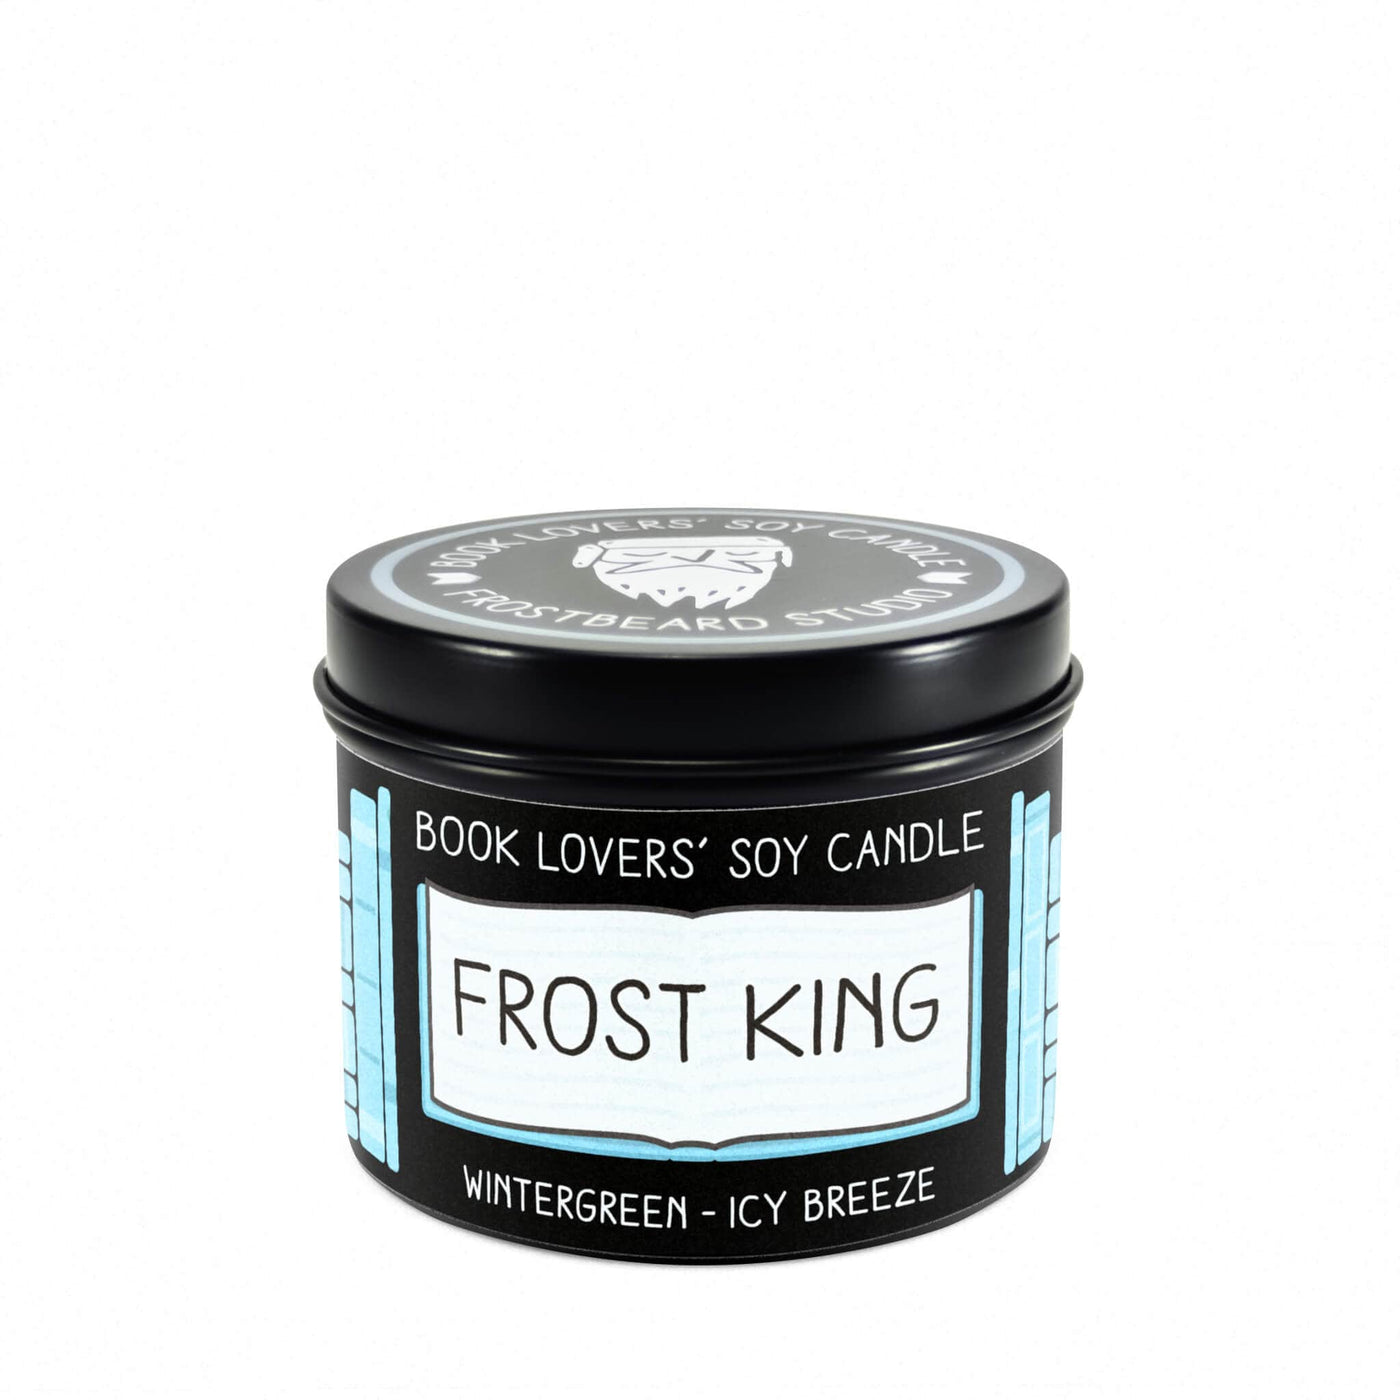 Frost King  -  4 oz Tin  -  Book Lovers' Soy Candle  -  Frostbeard Studio